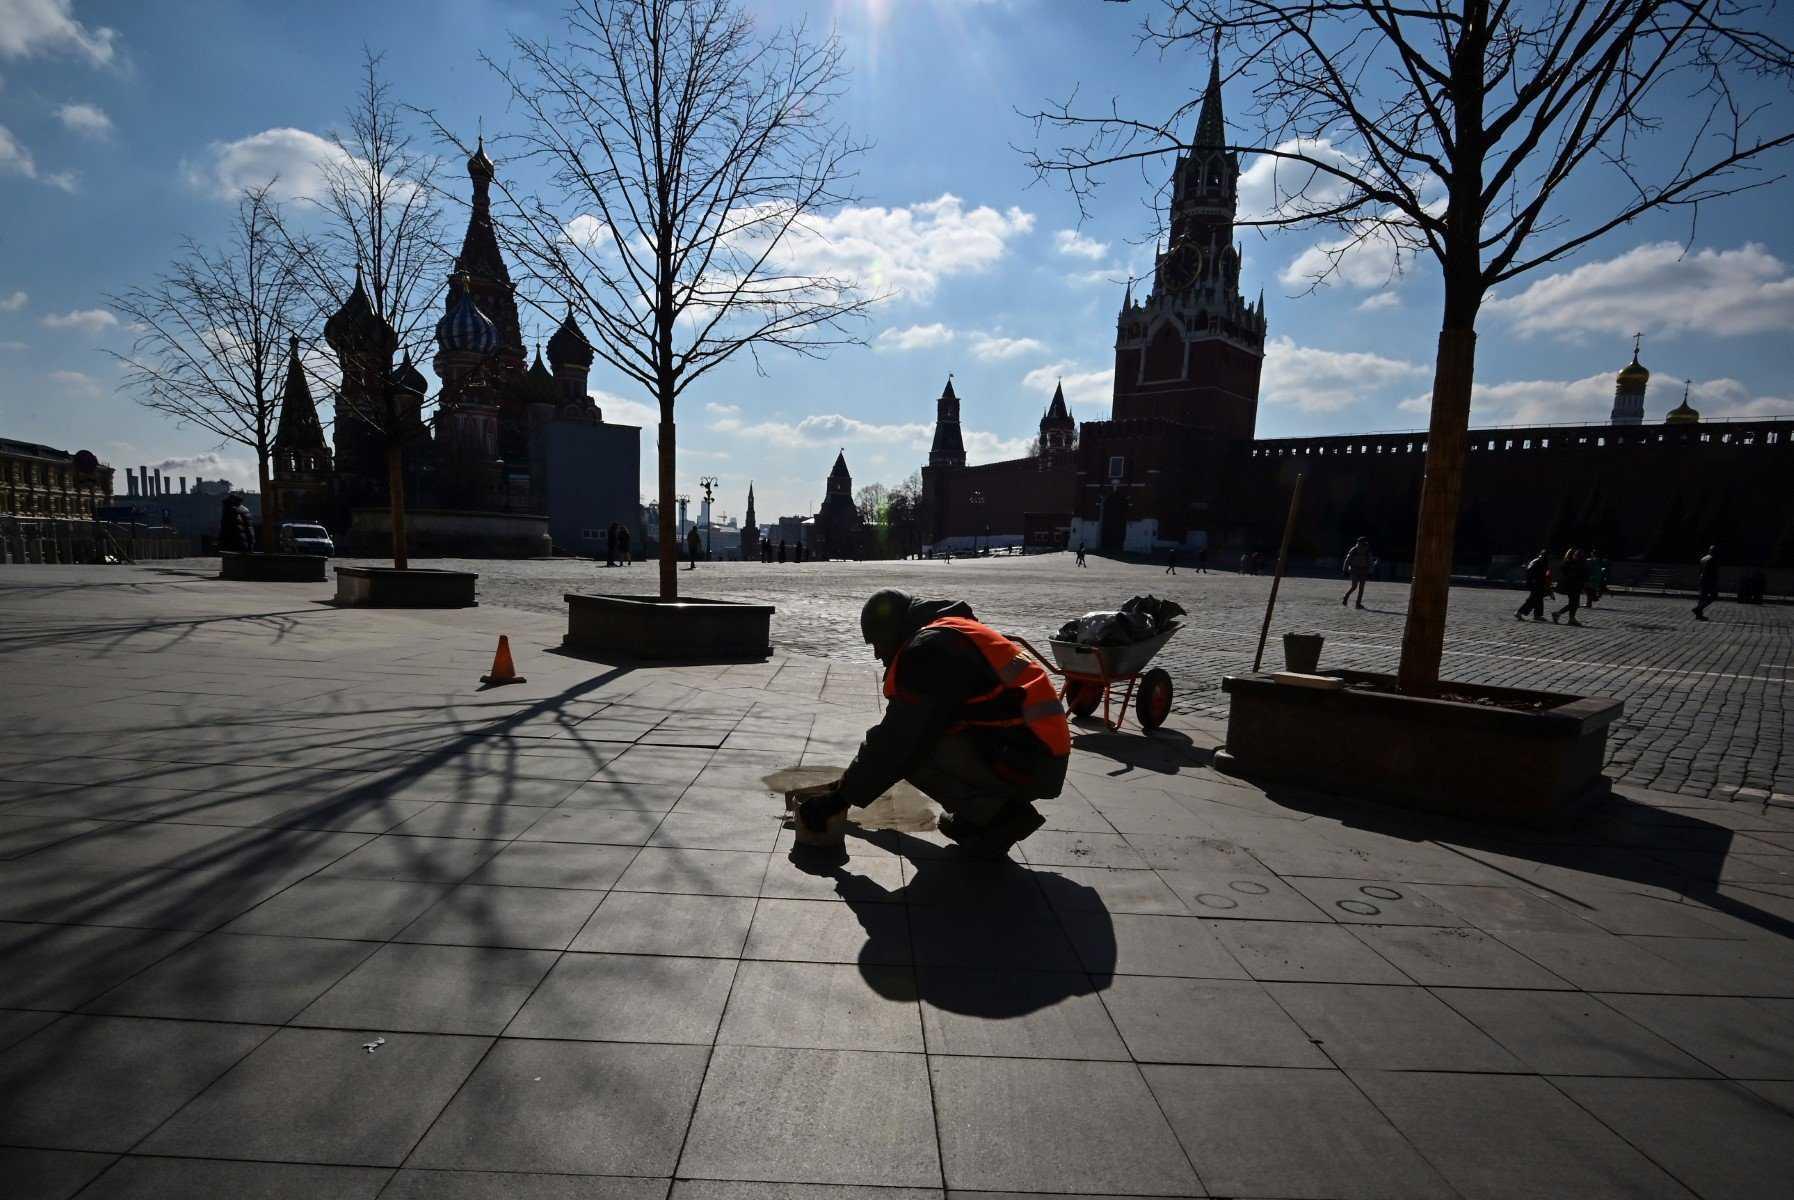 A worker fixes paving tiles at Red Square in central Moscow on March 16. Photo: AFP